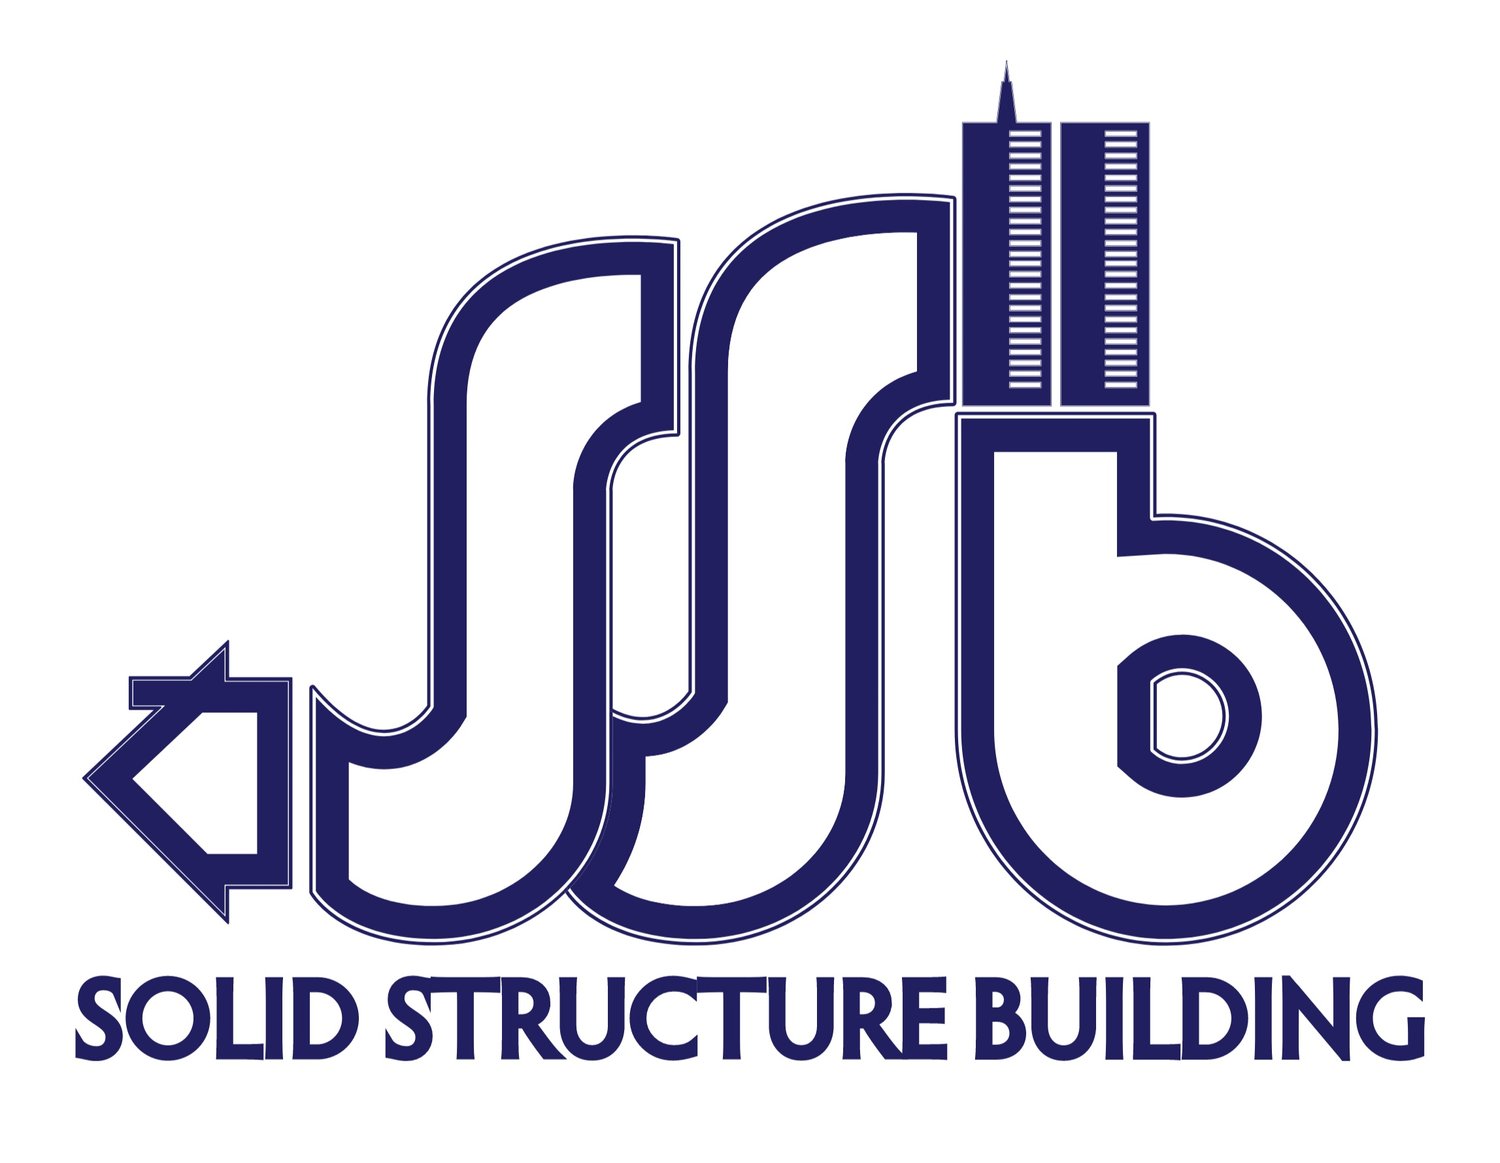 SOLID STRUCTURE BUILDING